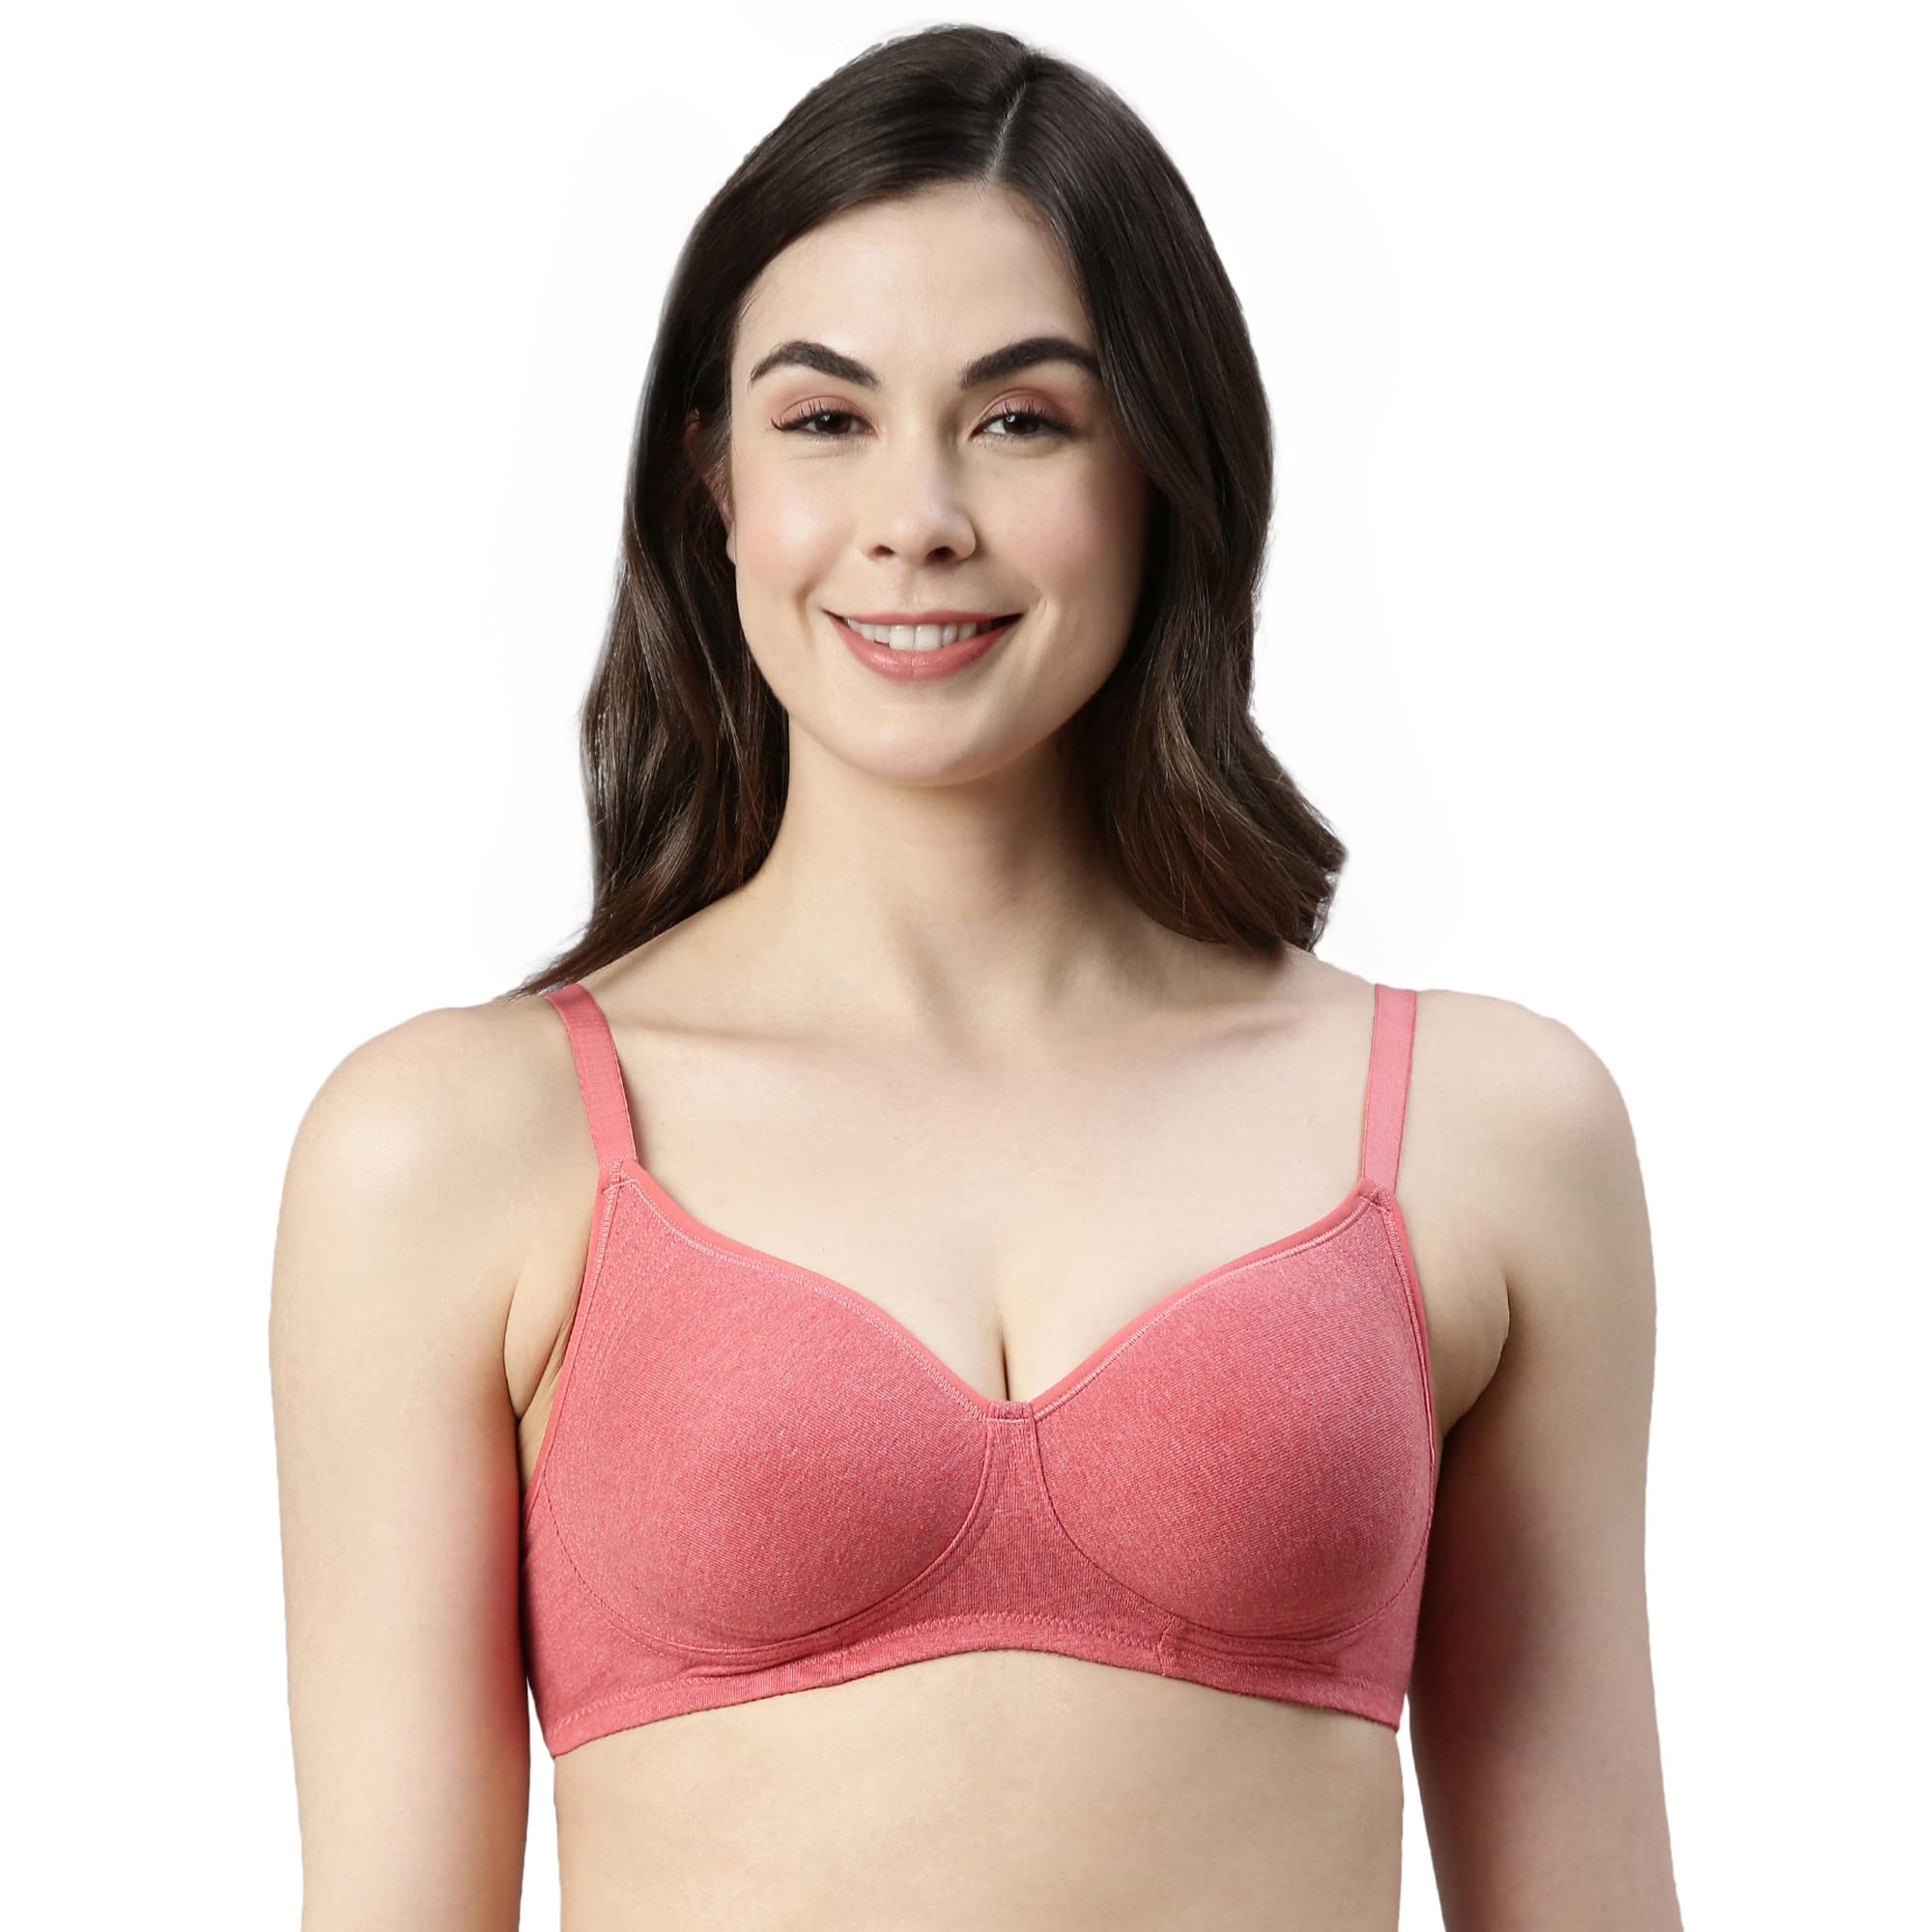 Enamor A042 Side Support�Shaper�Stretch�Cotton Everyday Bra -  Non-Padded,�Wire